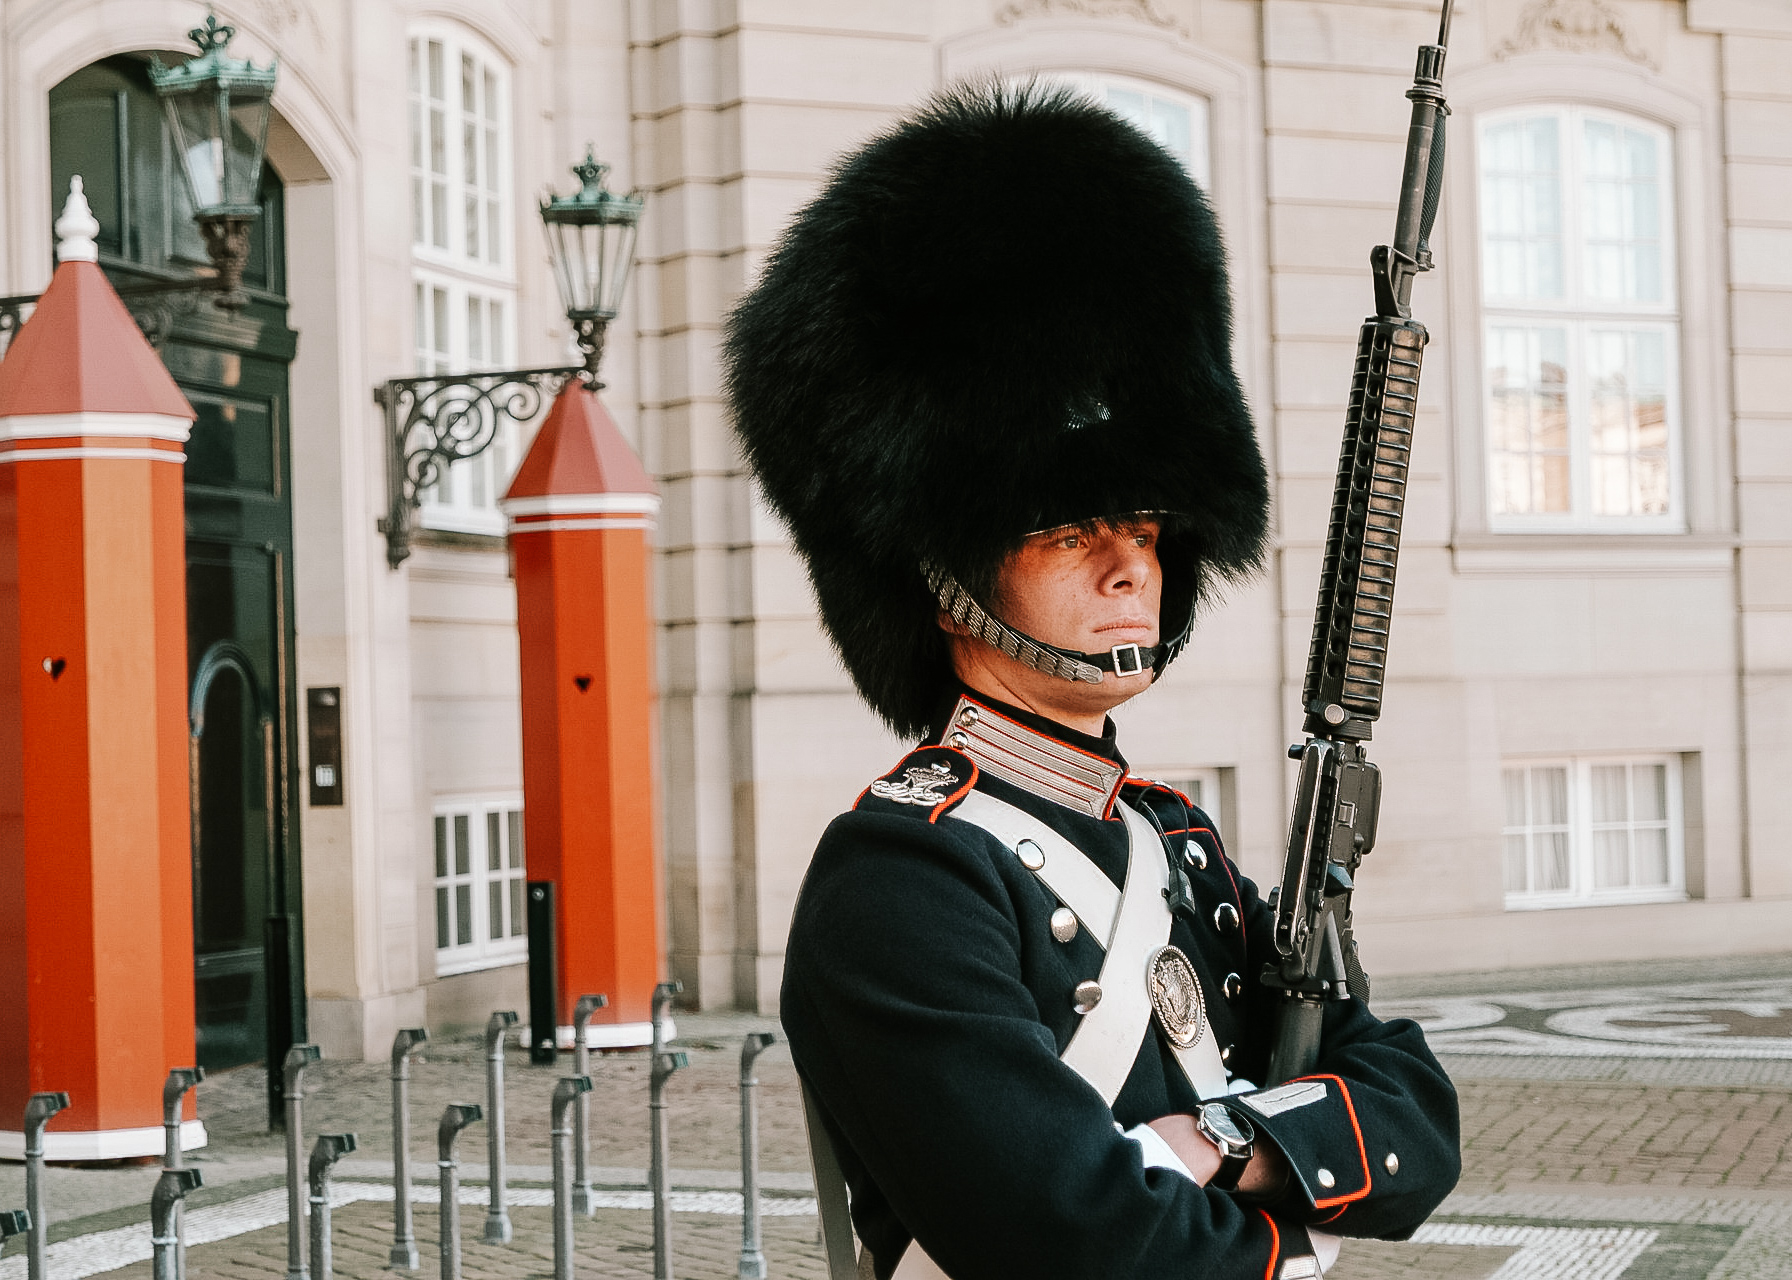 A guard in front of Amalieborg palace in Copenhagen with a fussy hat, a rifle and a navy traditional uniform in front of two red guard posts.